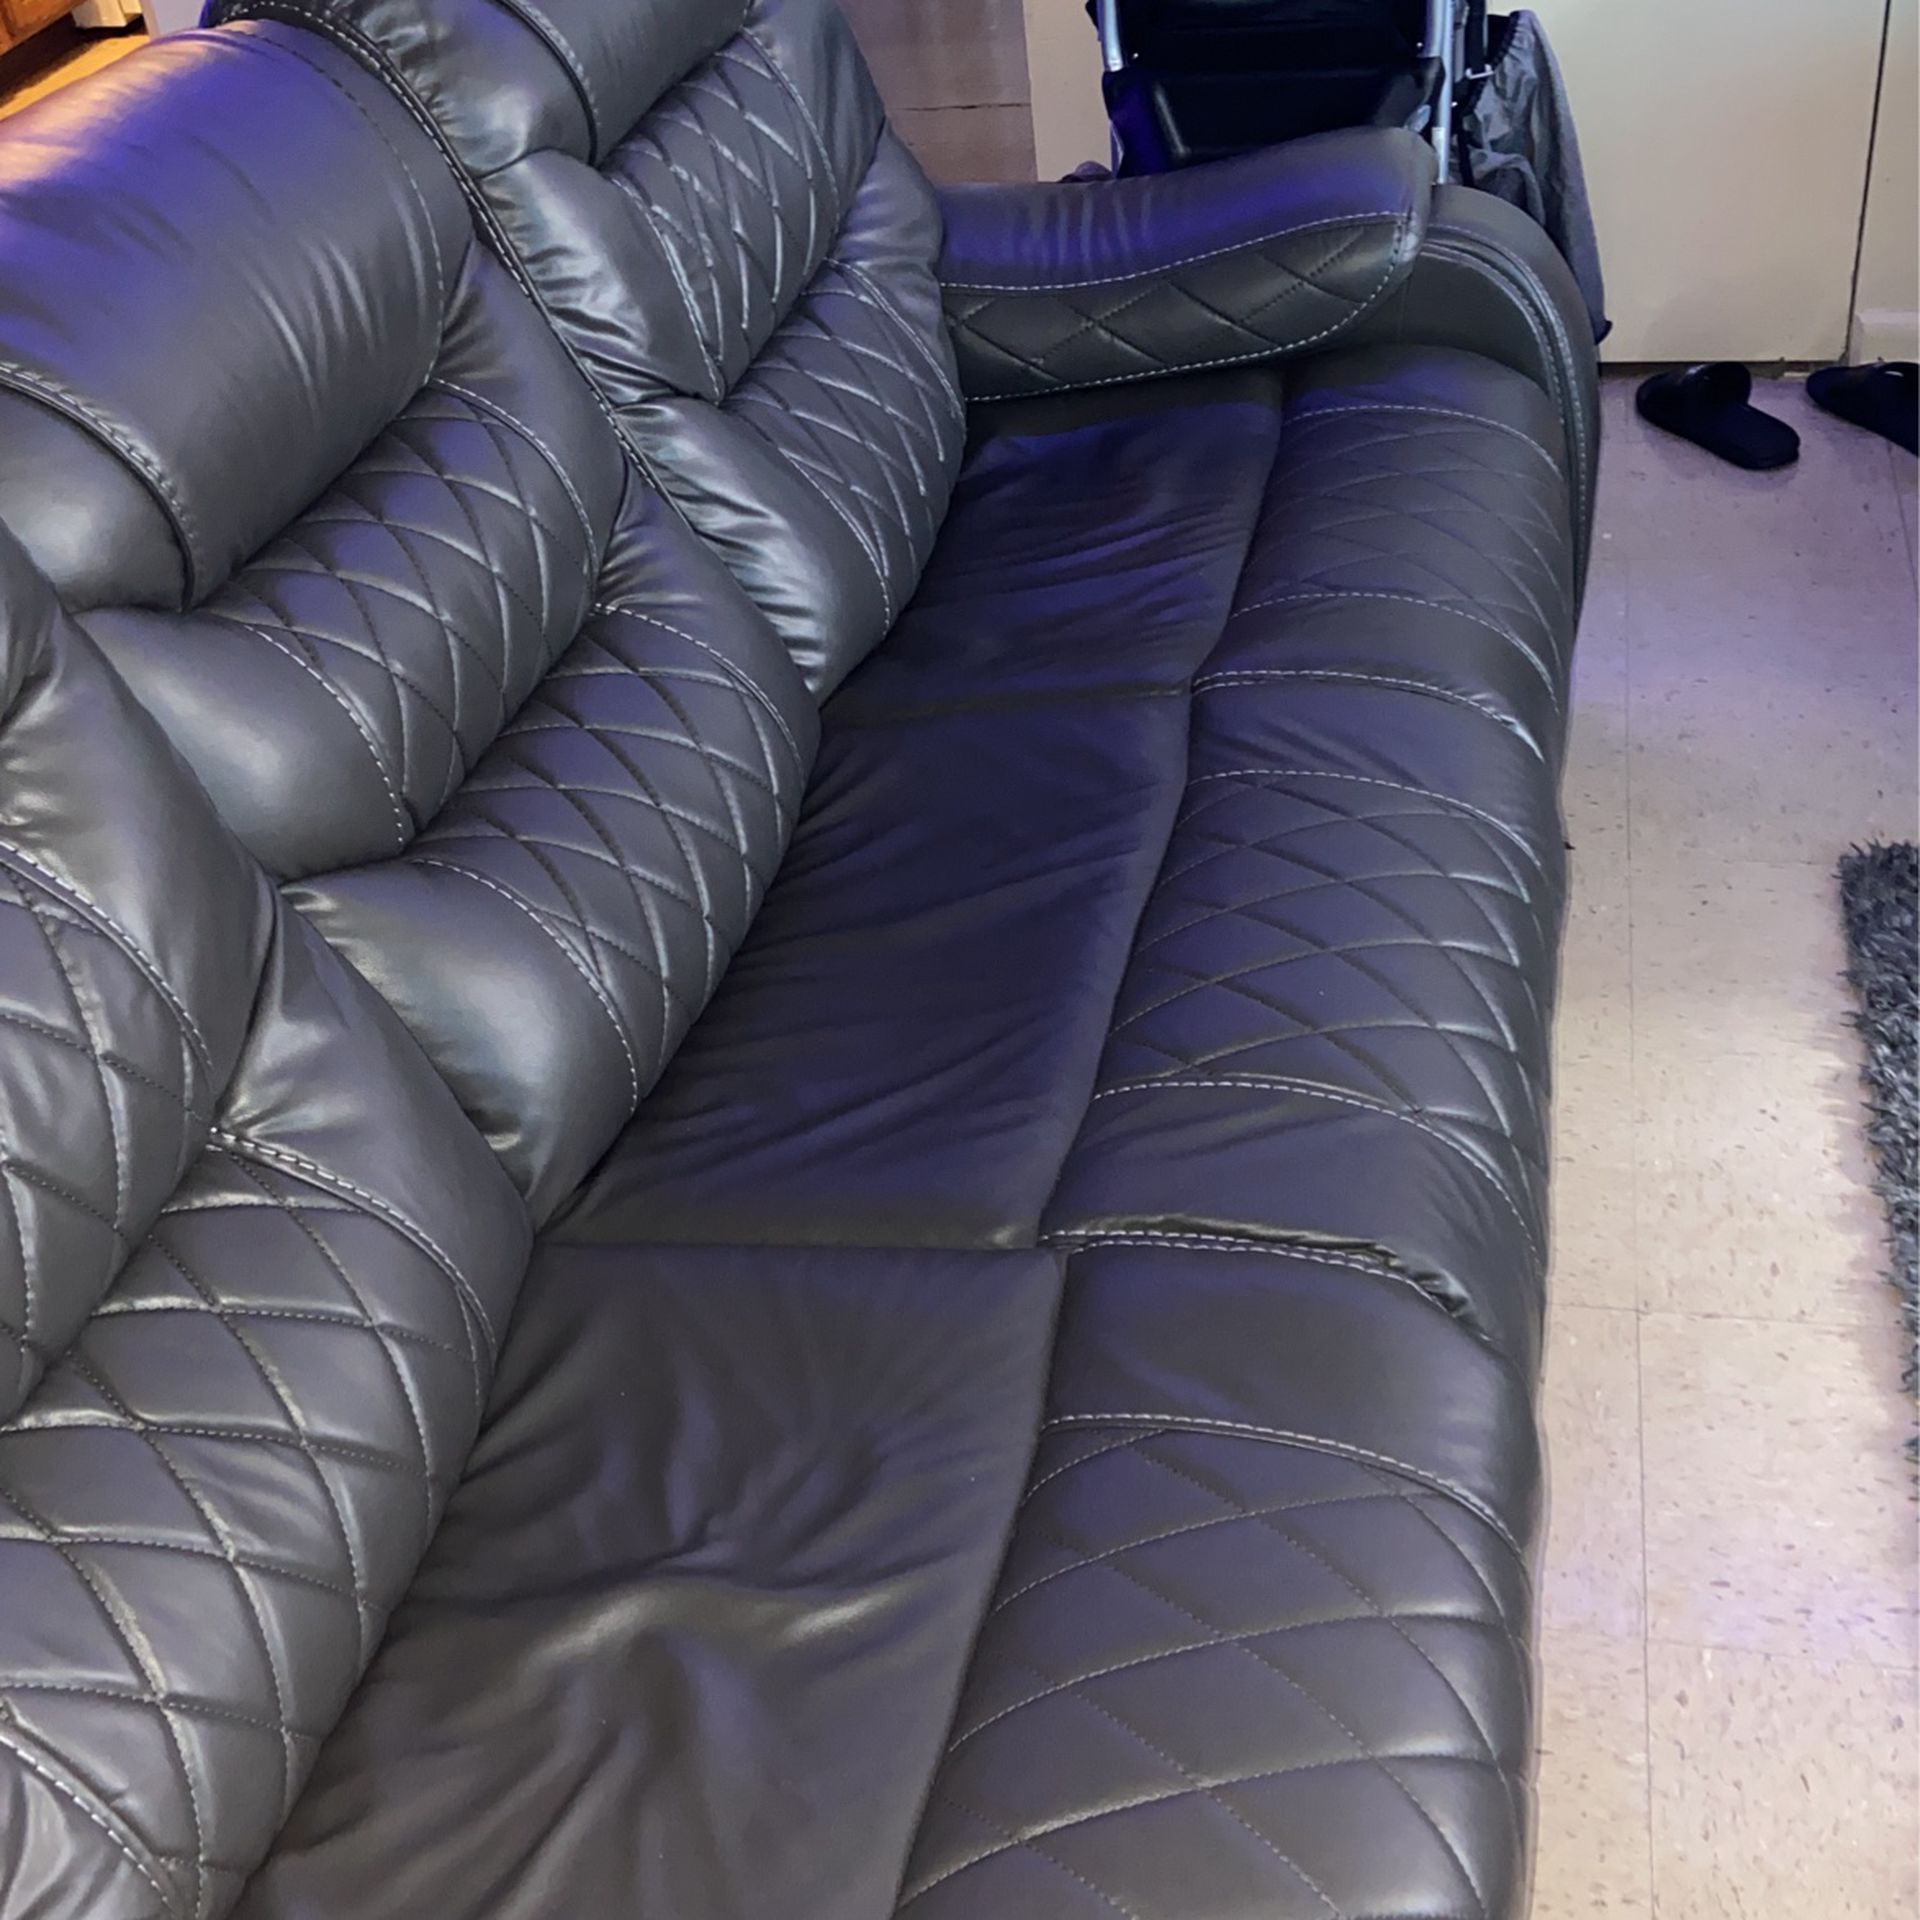 Recliner 3 Seated Couch